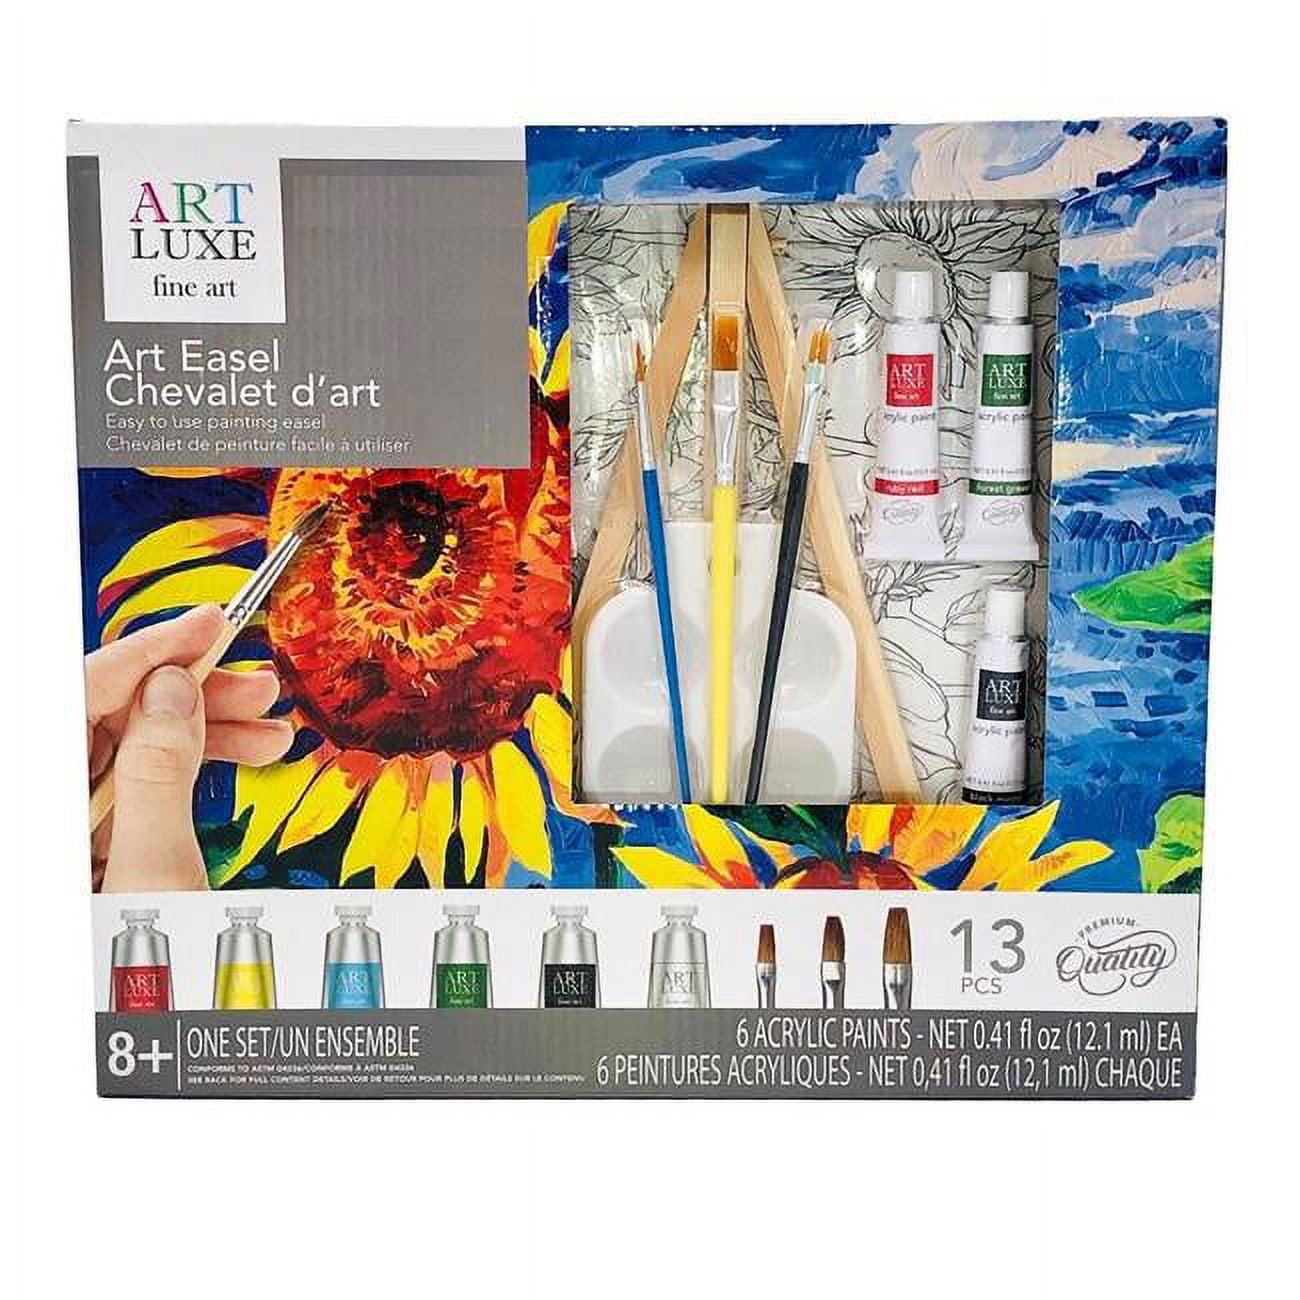  RoseArt Premium Paint Set – 12 Count Acrylic Paints for Canvas,  Wood, Ceramic and Fabrics – Craft Painting Supplies for Casual to  Professional Artists